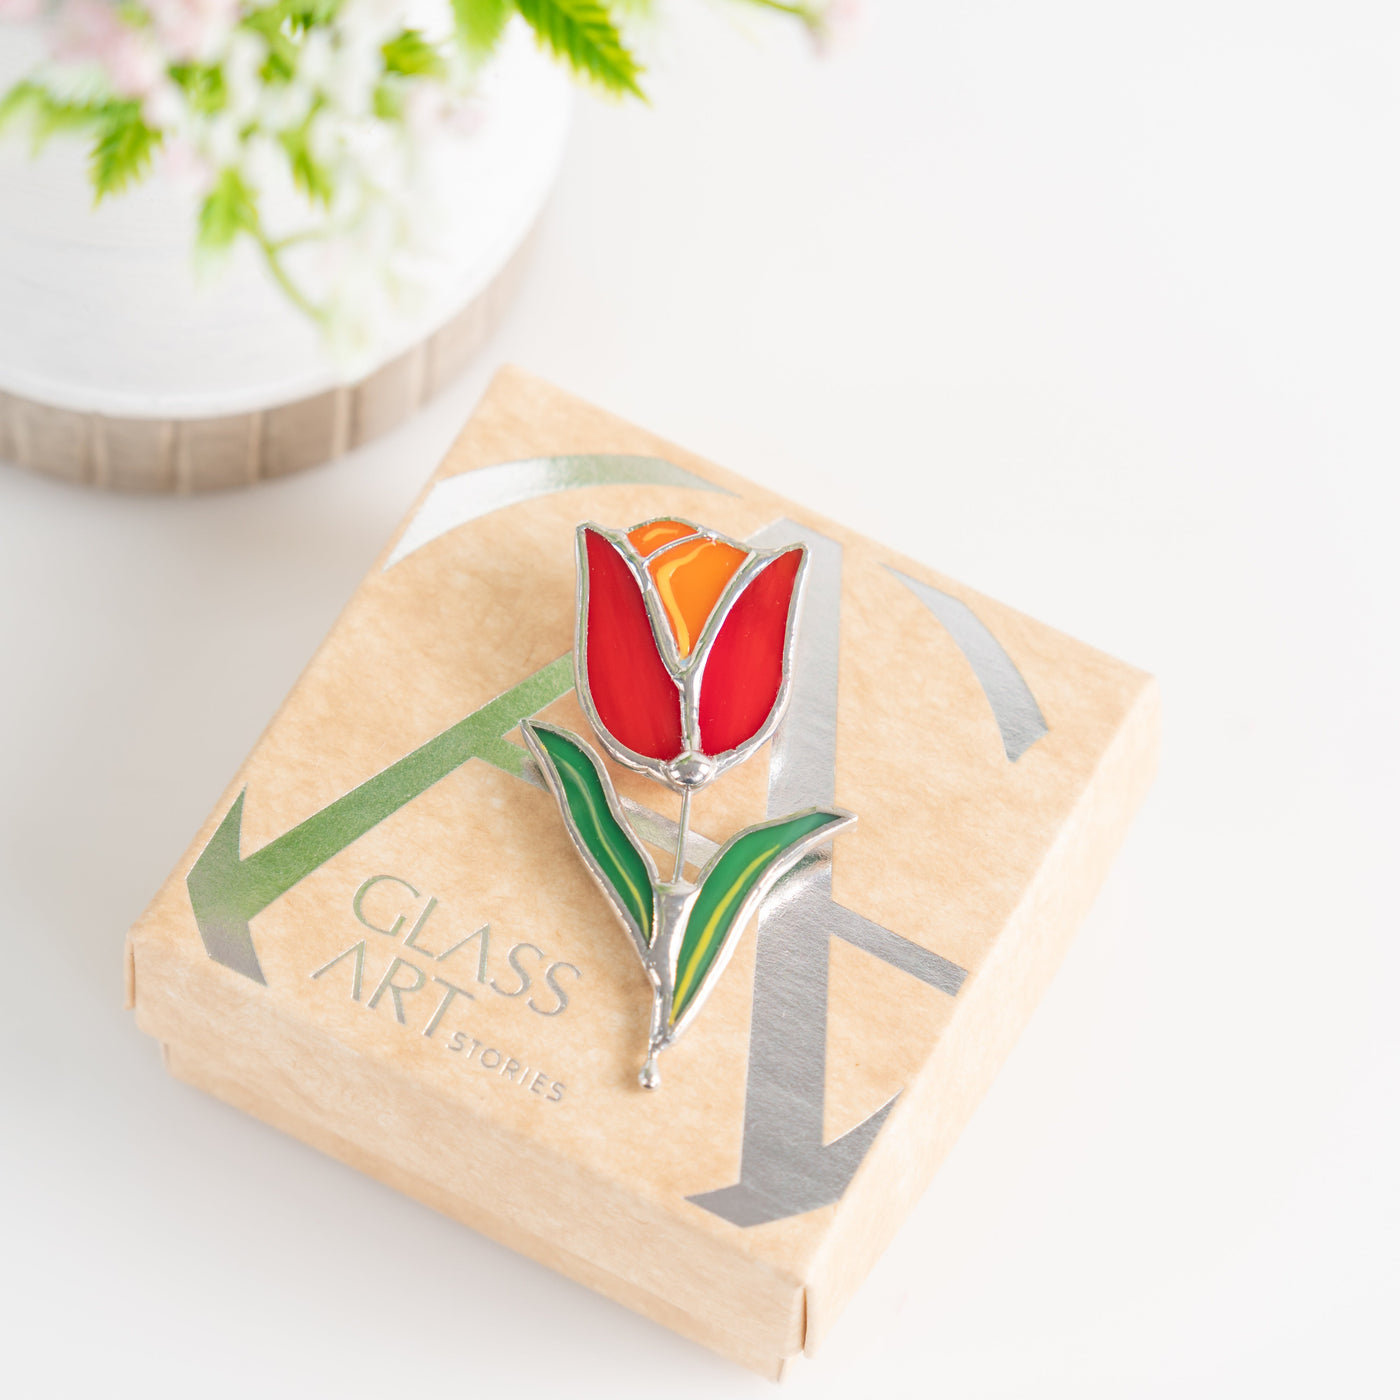 Stained glass red flower pin and a brand box